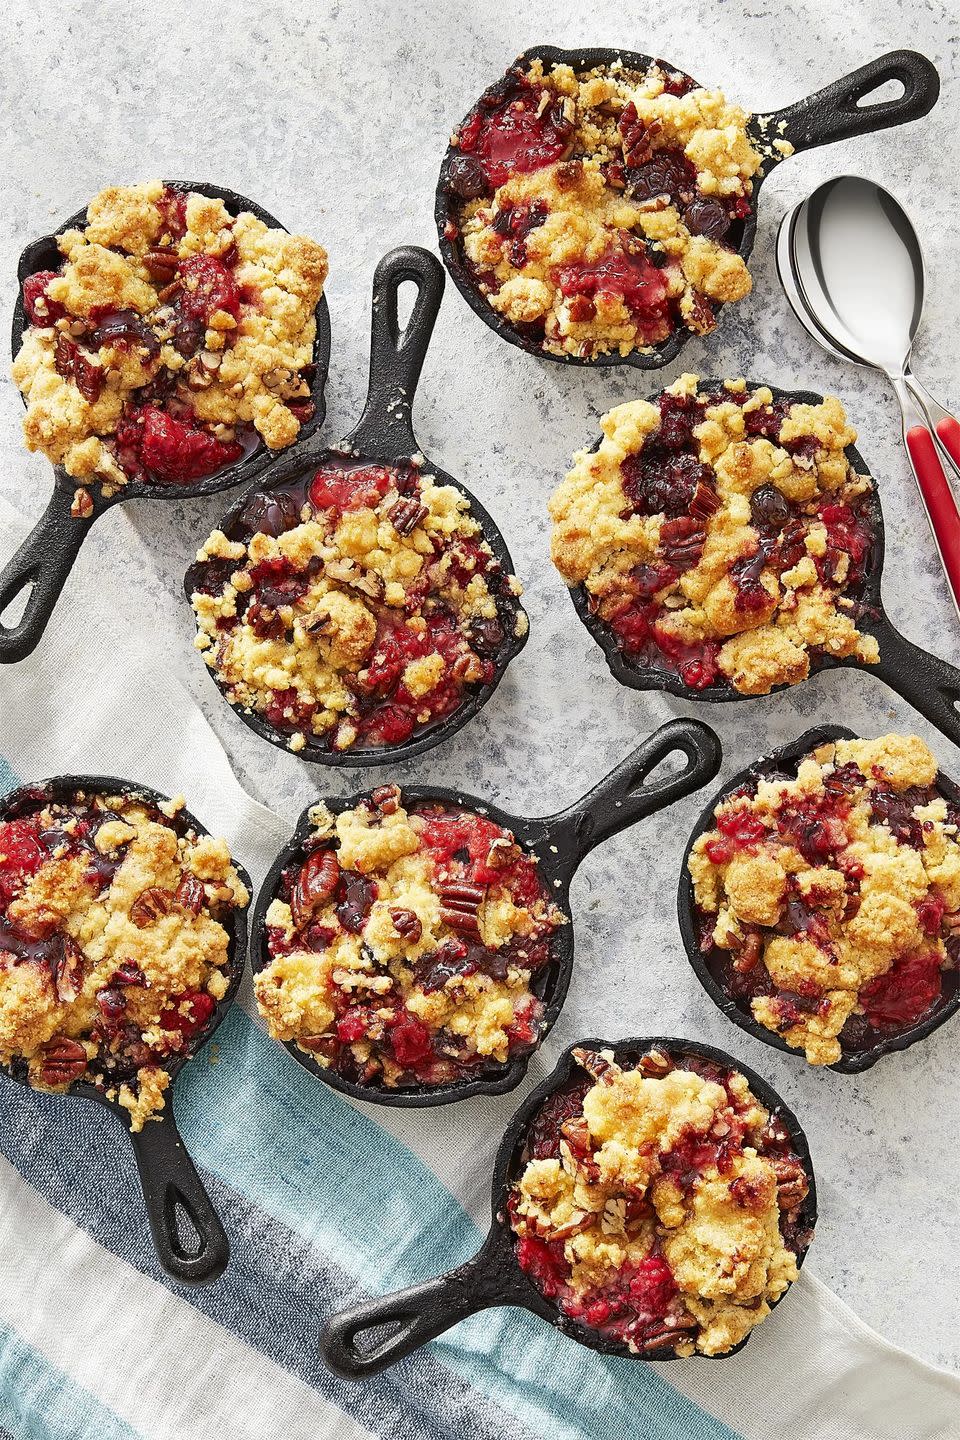 jiffy mixed berry cornmeal cobbler baked in individual mini cast iron skillets